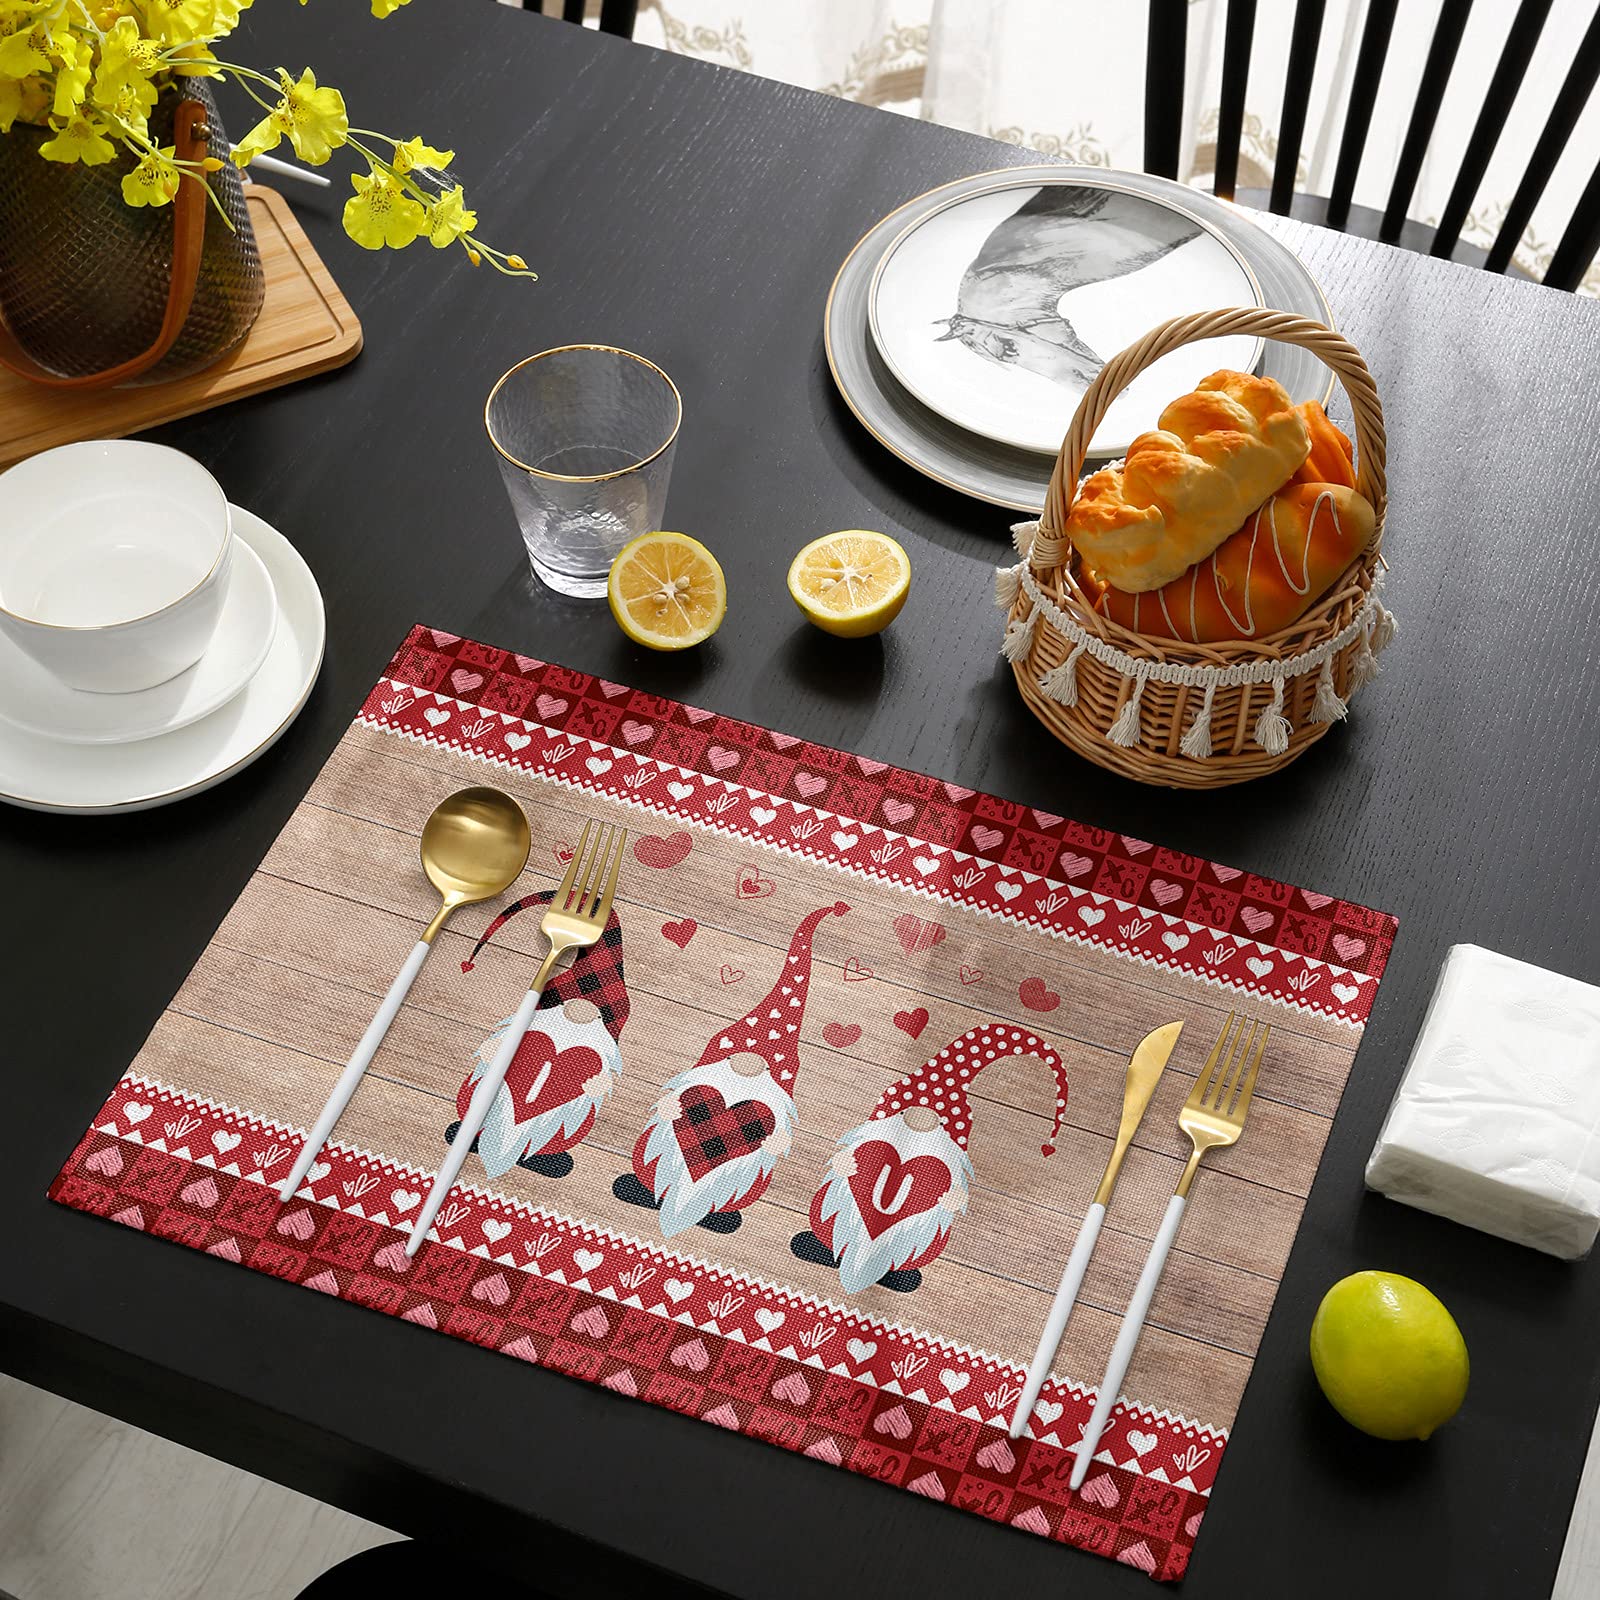 I Love You - Adorable Gnome Themed Placemat